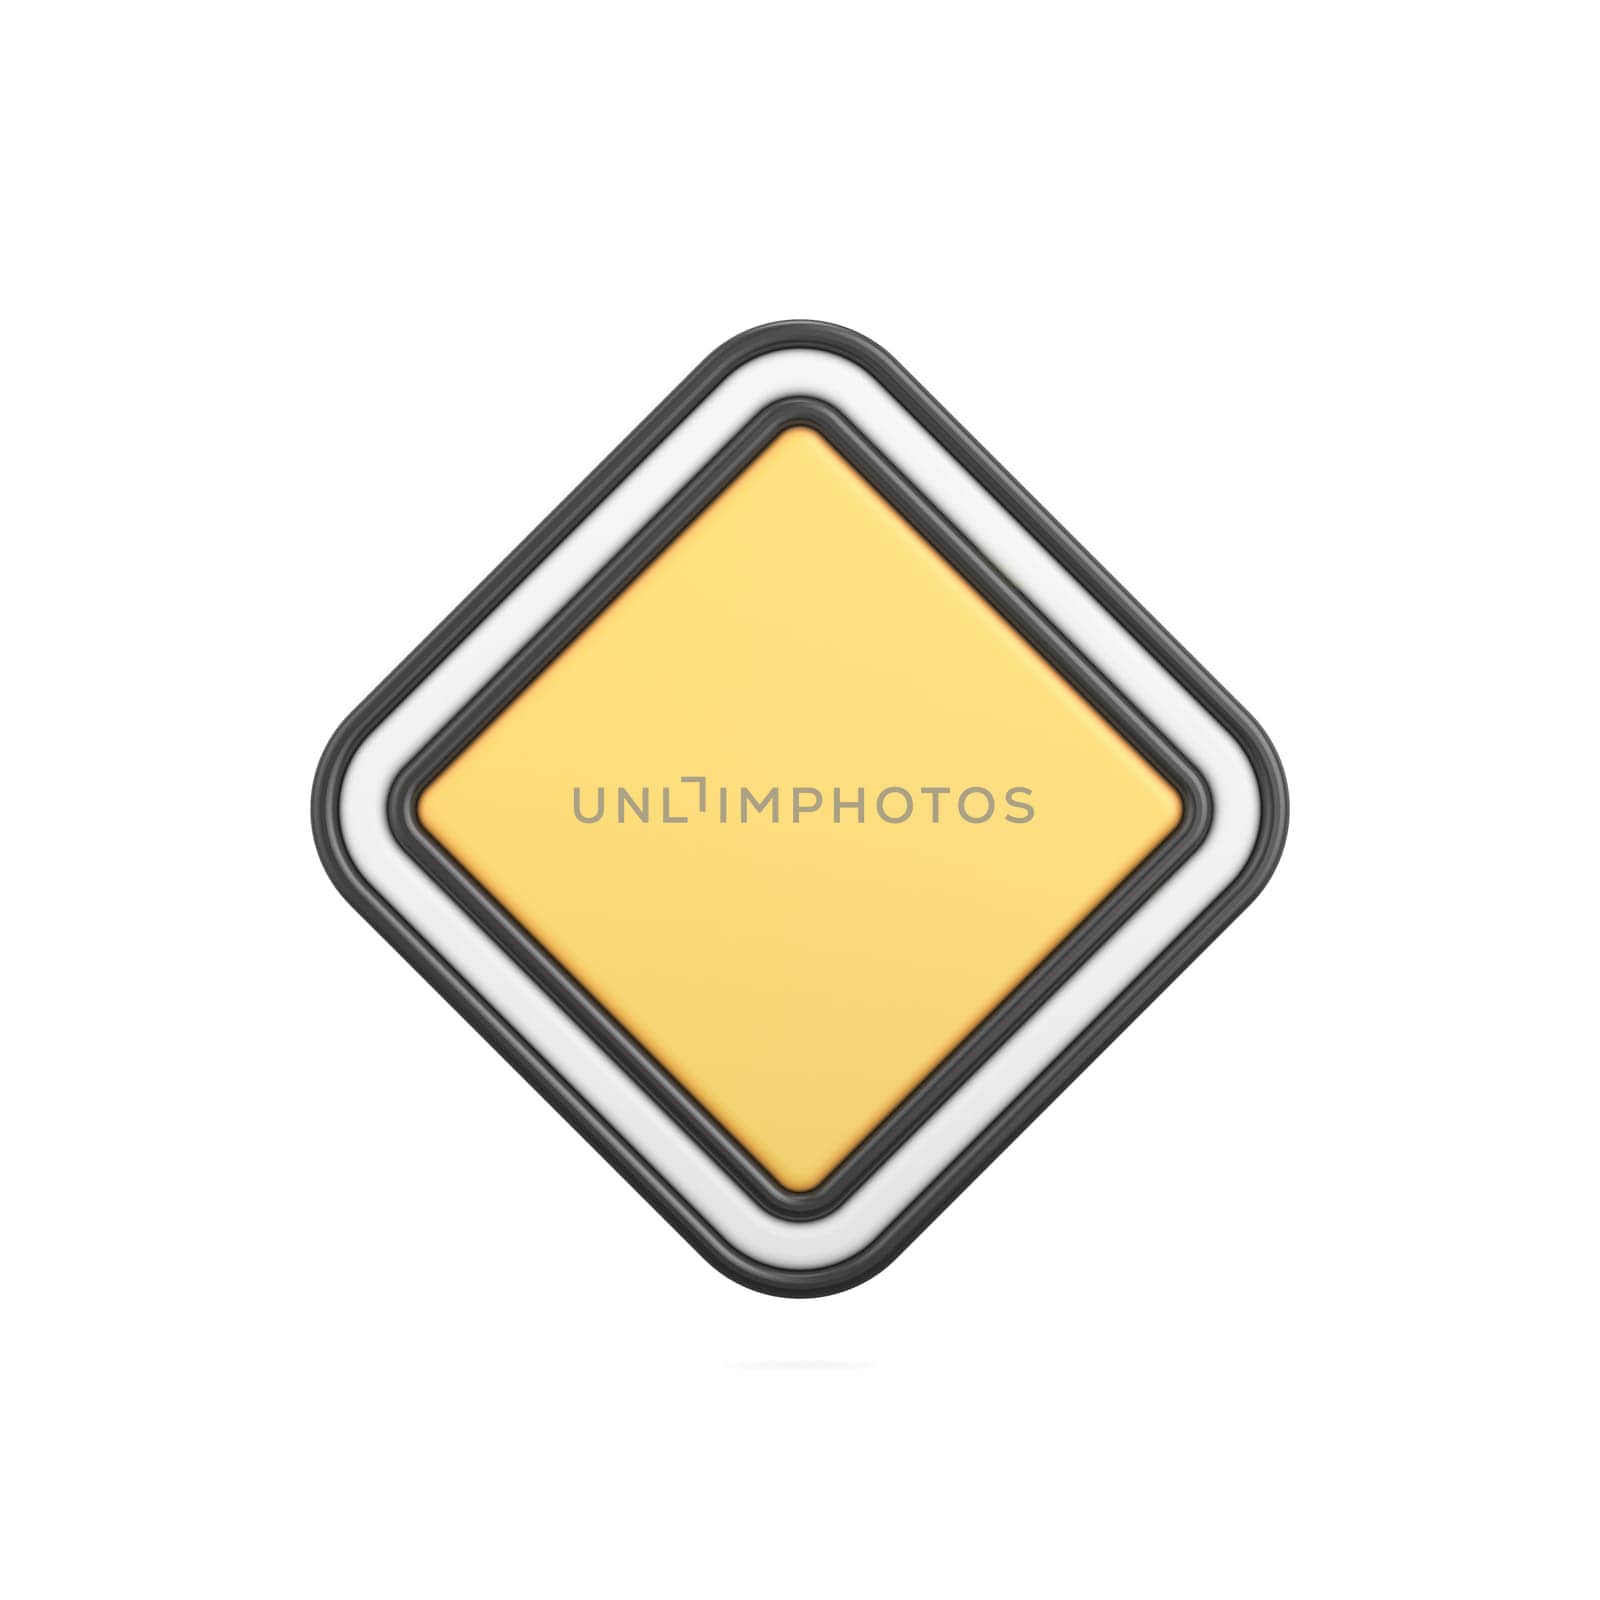 Traffic sign Priority road sign 3D rendering illustration isolated on white background